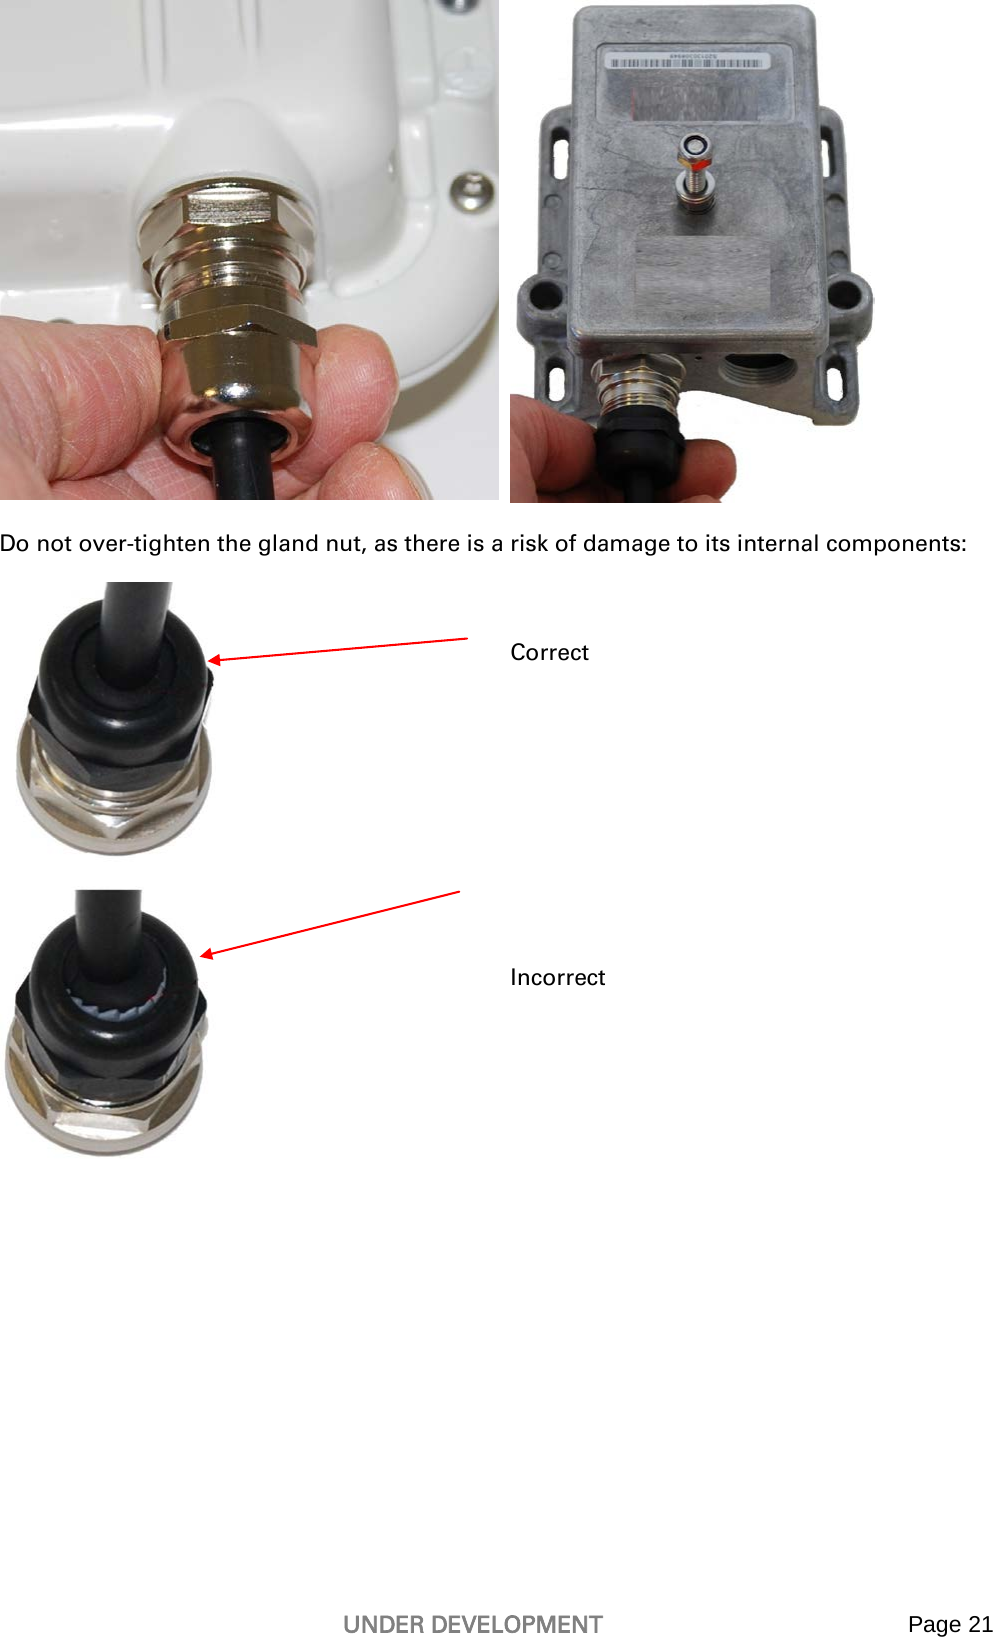   UNDER DEVELOPMENT Page 21      Do not over-tighten the gland nut, as there is a risk of damage to its internal components:    Correct      Incorrect   